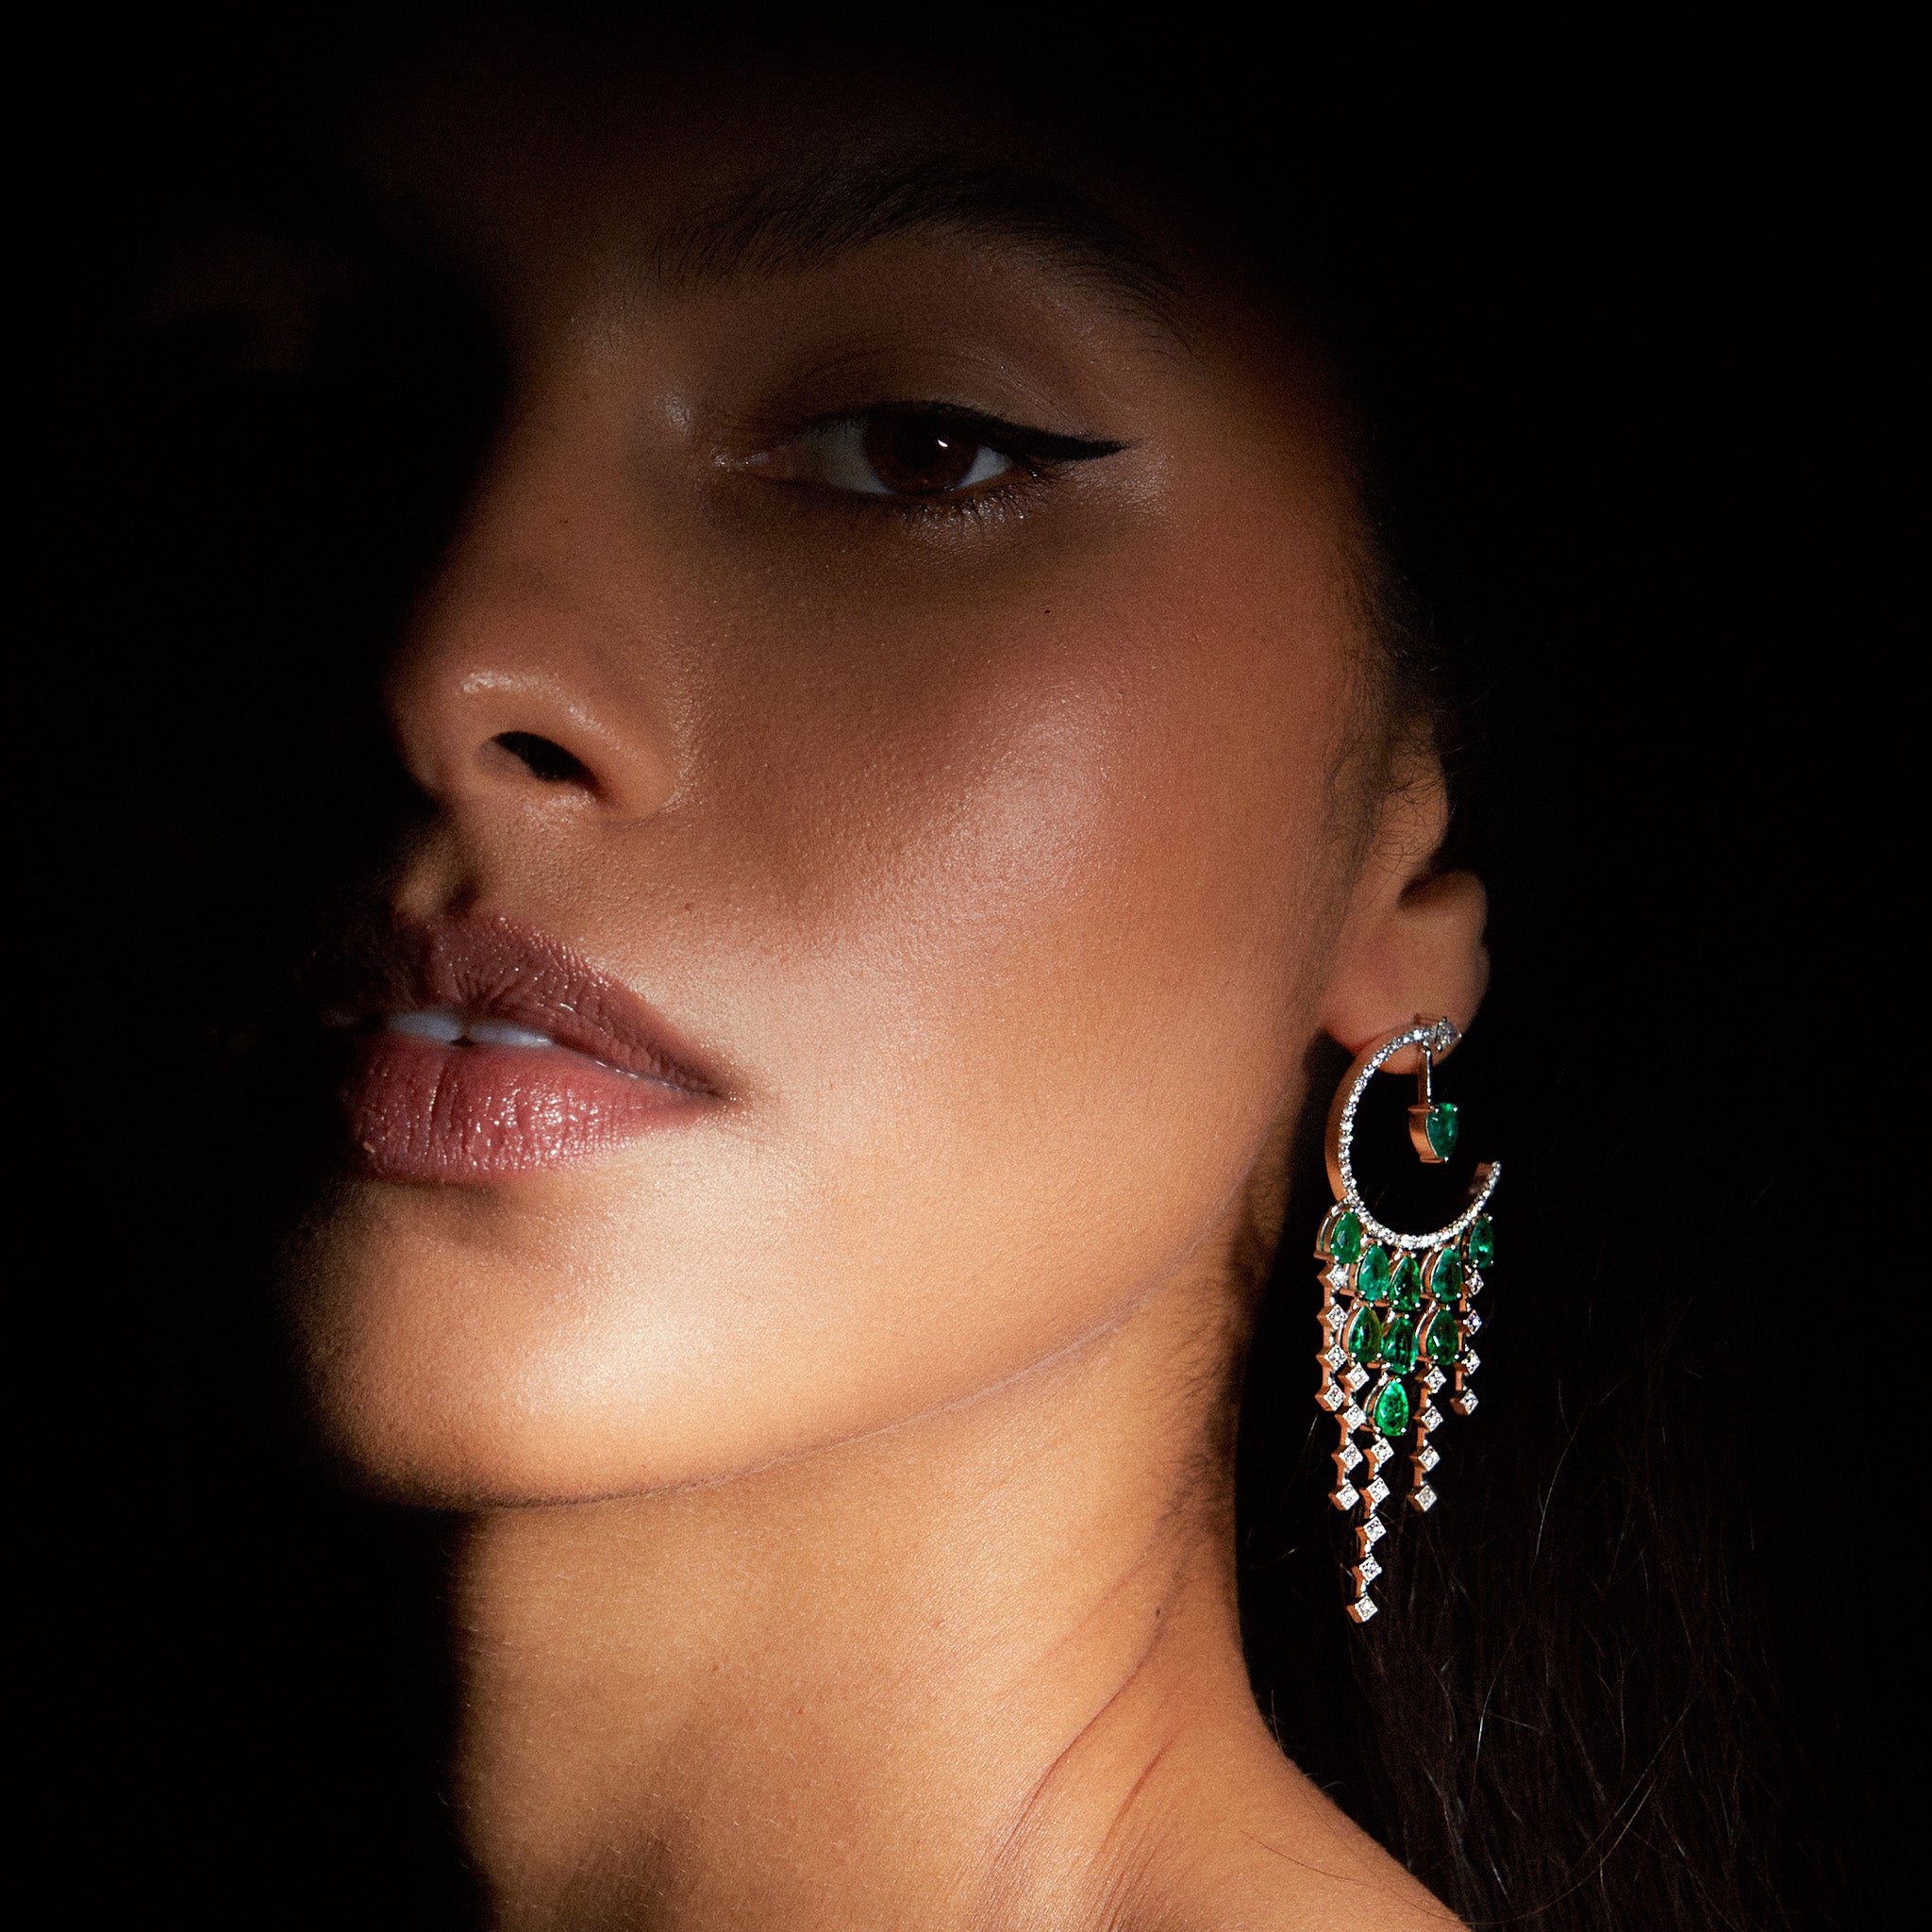 Anagenesis Emerald and Diamond Earrings, exquisite green emeralds and sparkling diamonds, showcased on model.